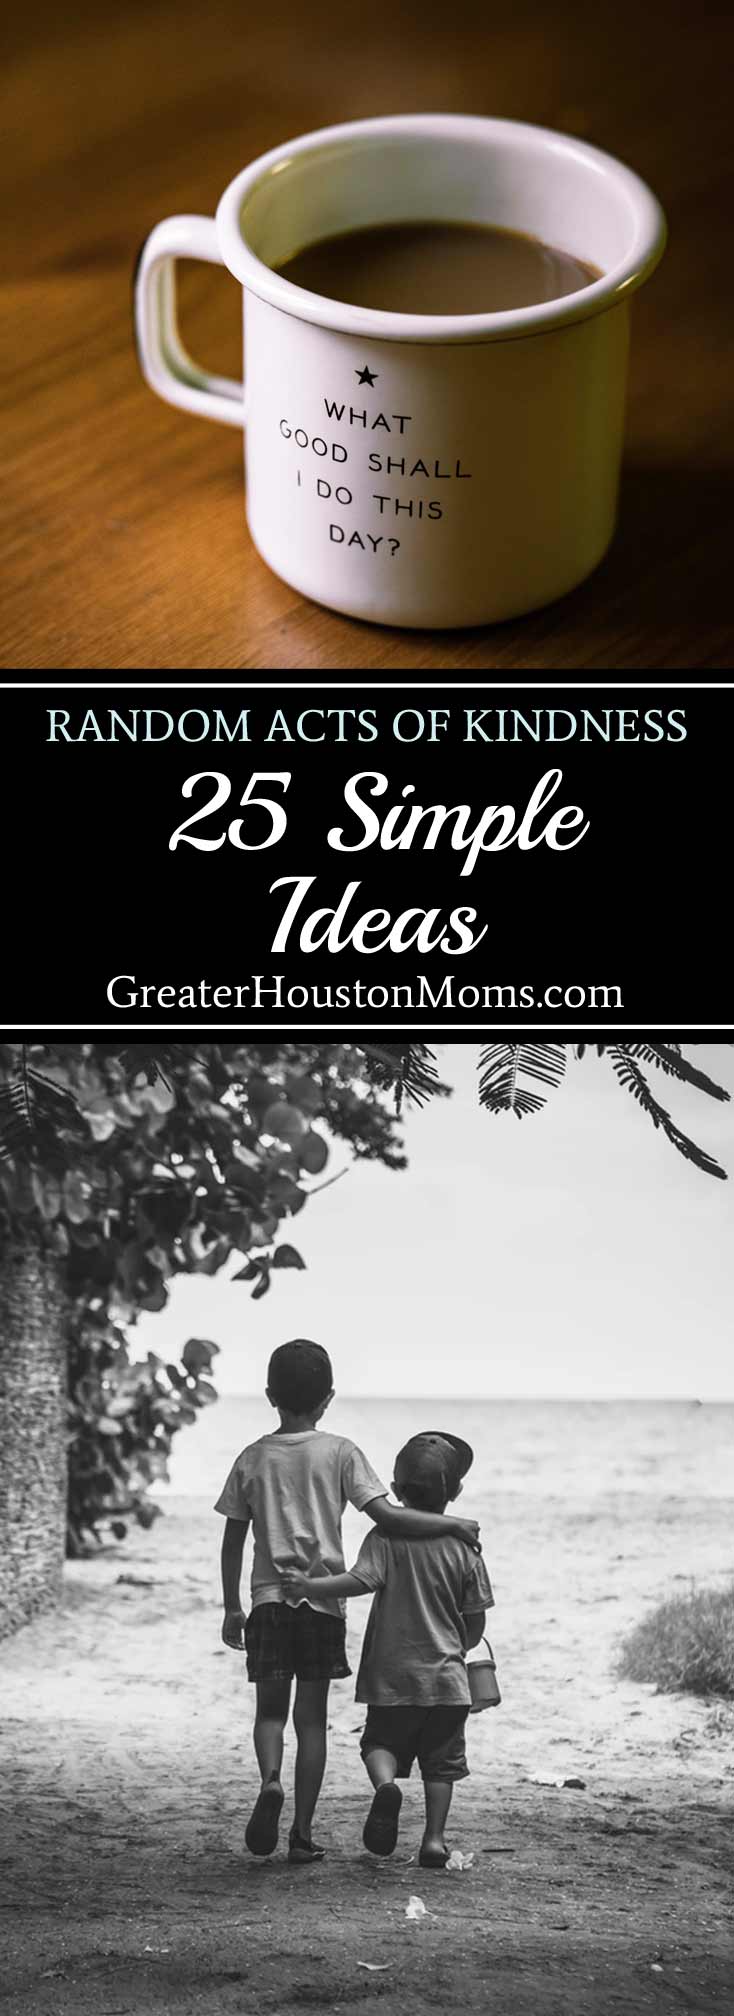 25 Simple Ideas for Kindness